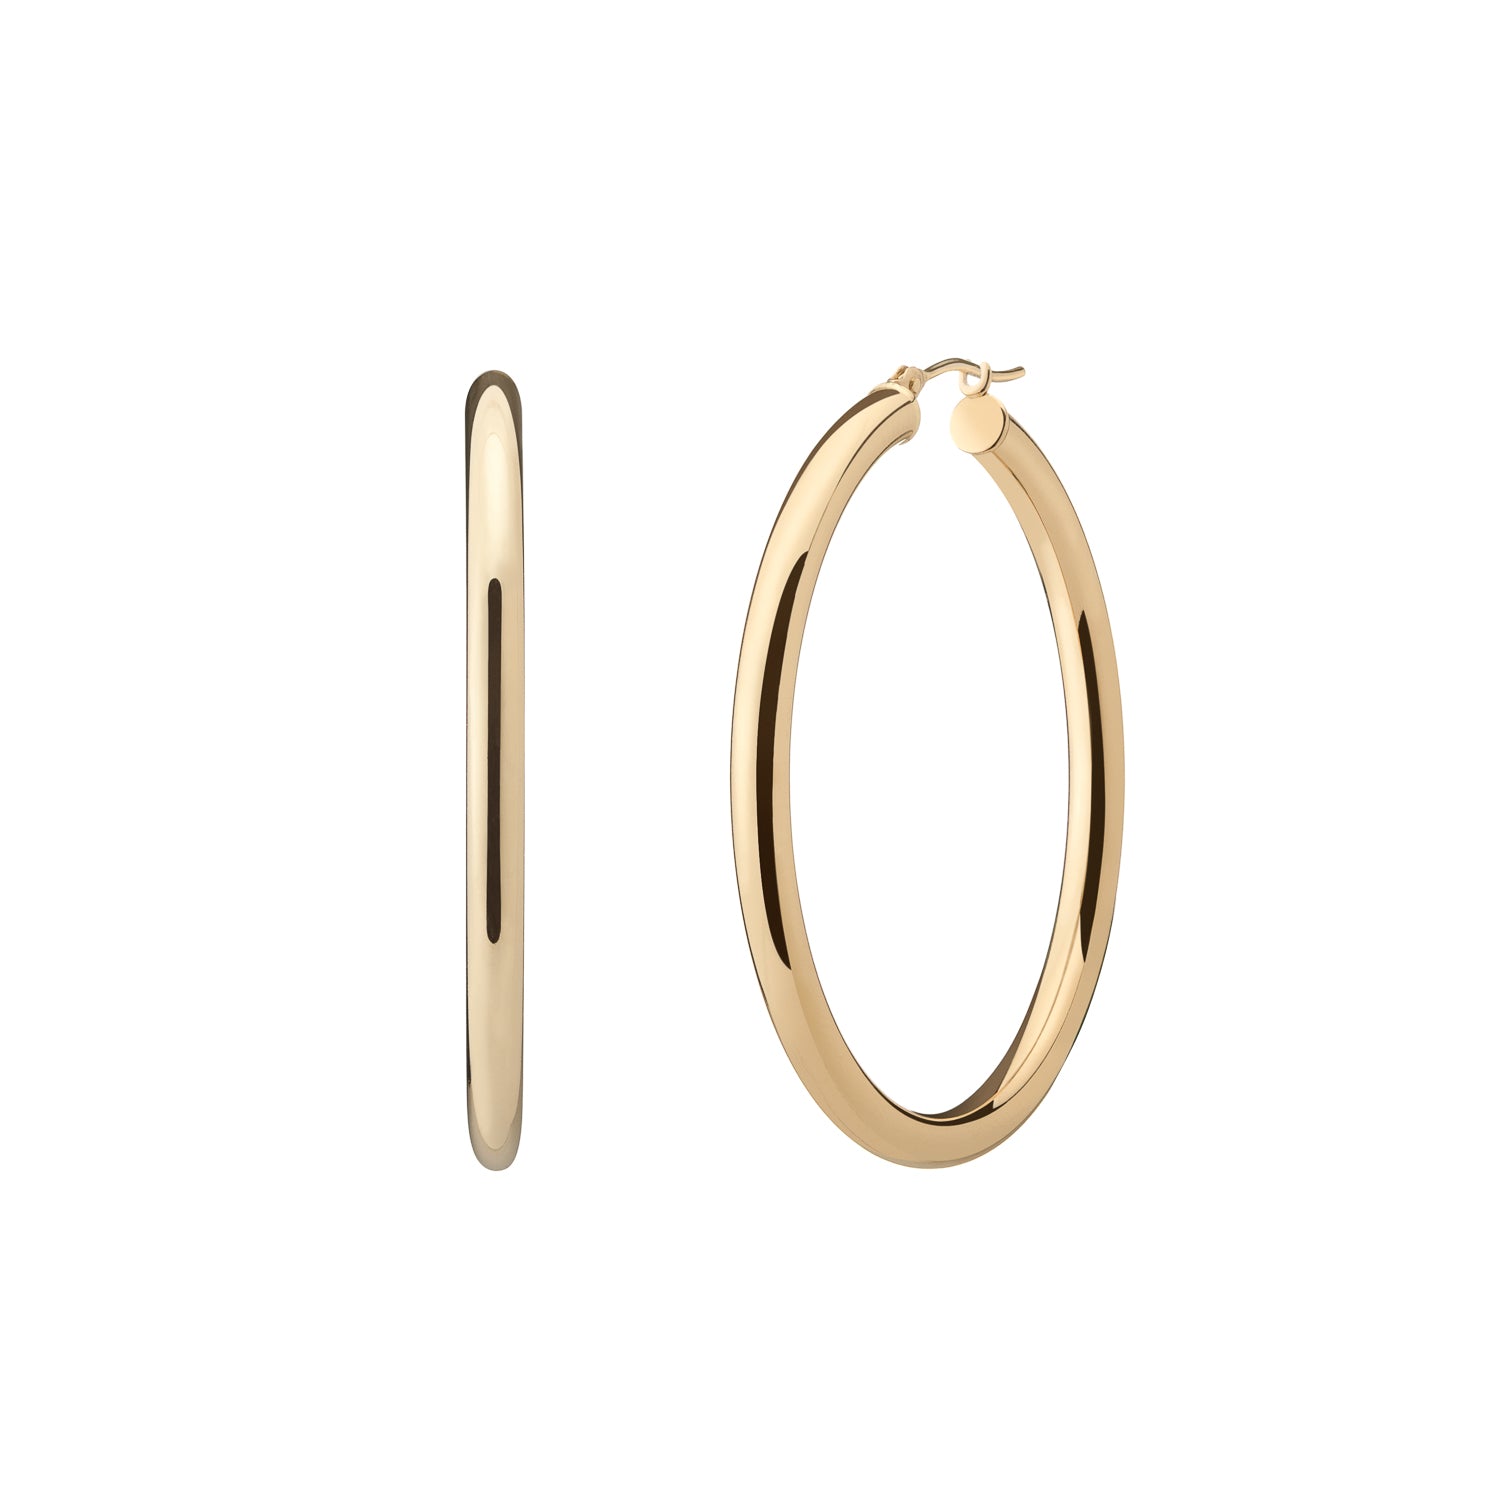 Perfect classic 14k yellow gold hollow hoops 1.5'' diameter